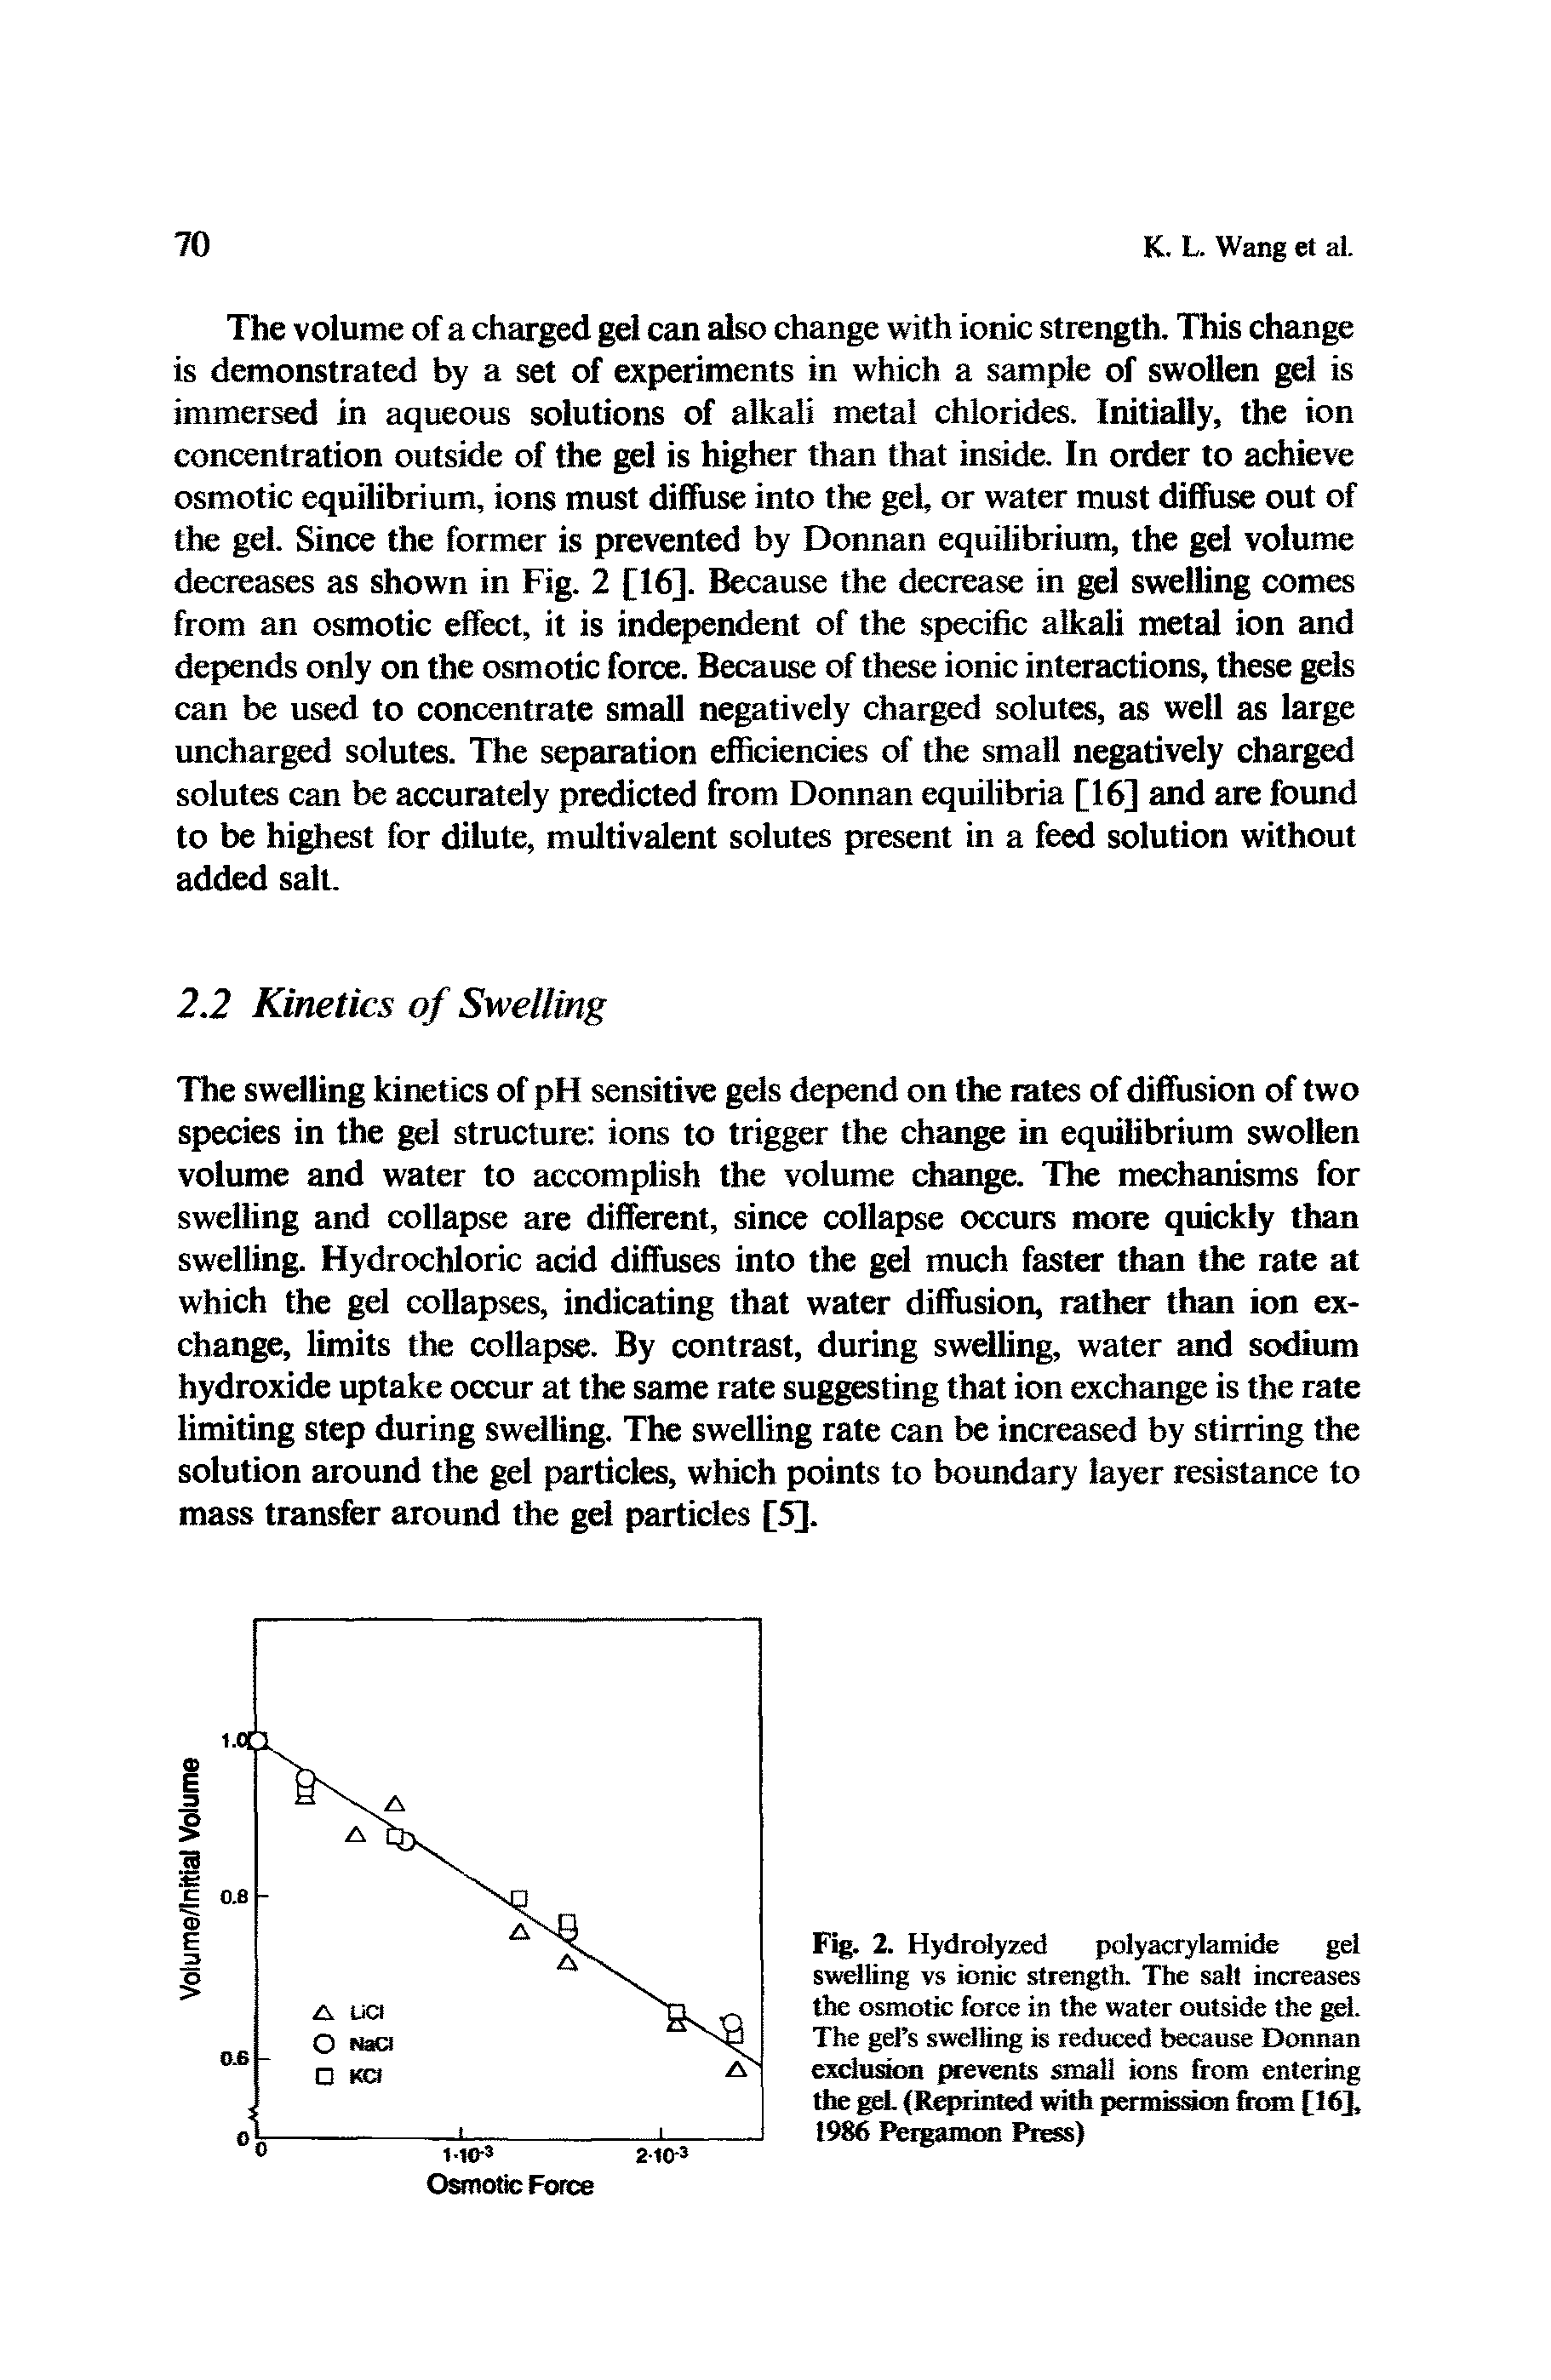 Fig. 2. Hydrolyzed polyacrylamide gel swelling vs ionic strength. The salt increases the osmotic force in the water outside the gel. The gel s swelling is reduced because Donnan exclusion prevents small ions from entering the get (Reprinted with permission from [16], 1986 Pergamon Press)...